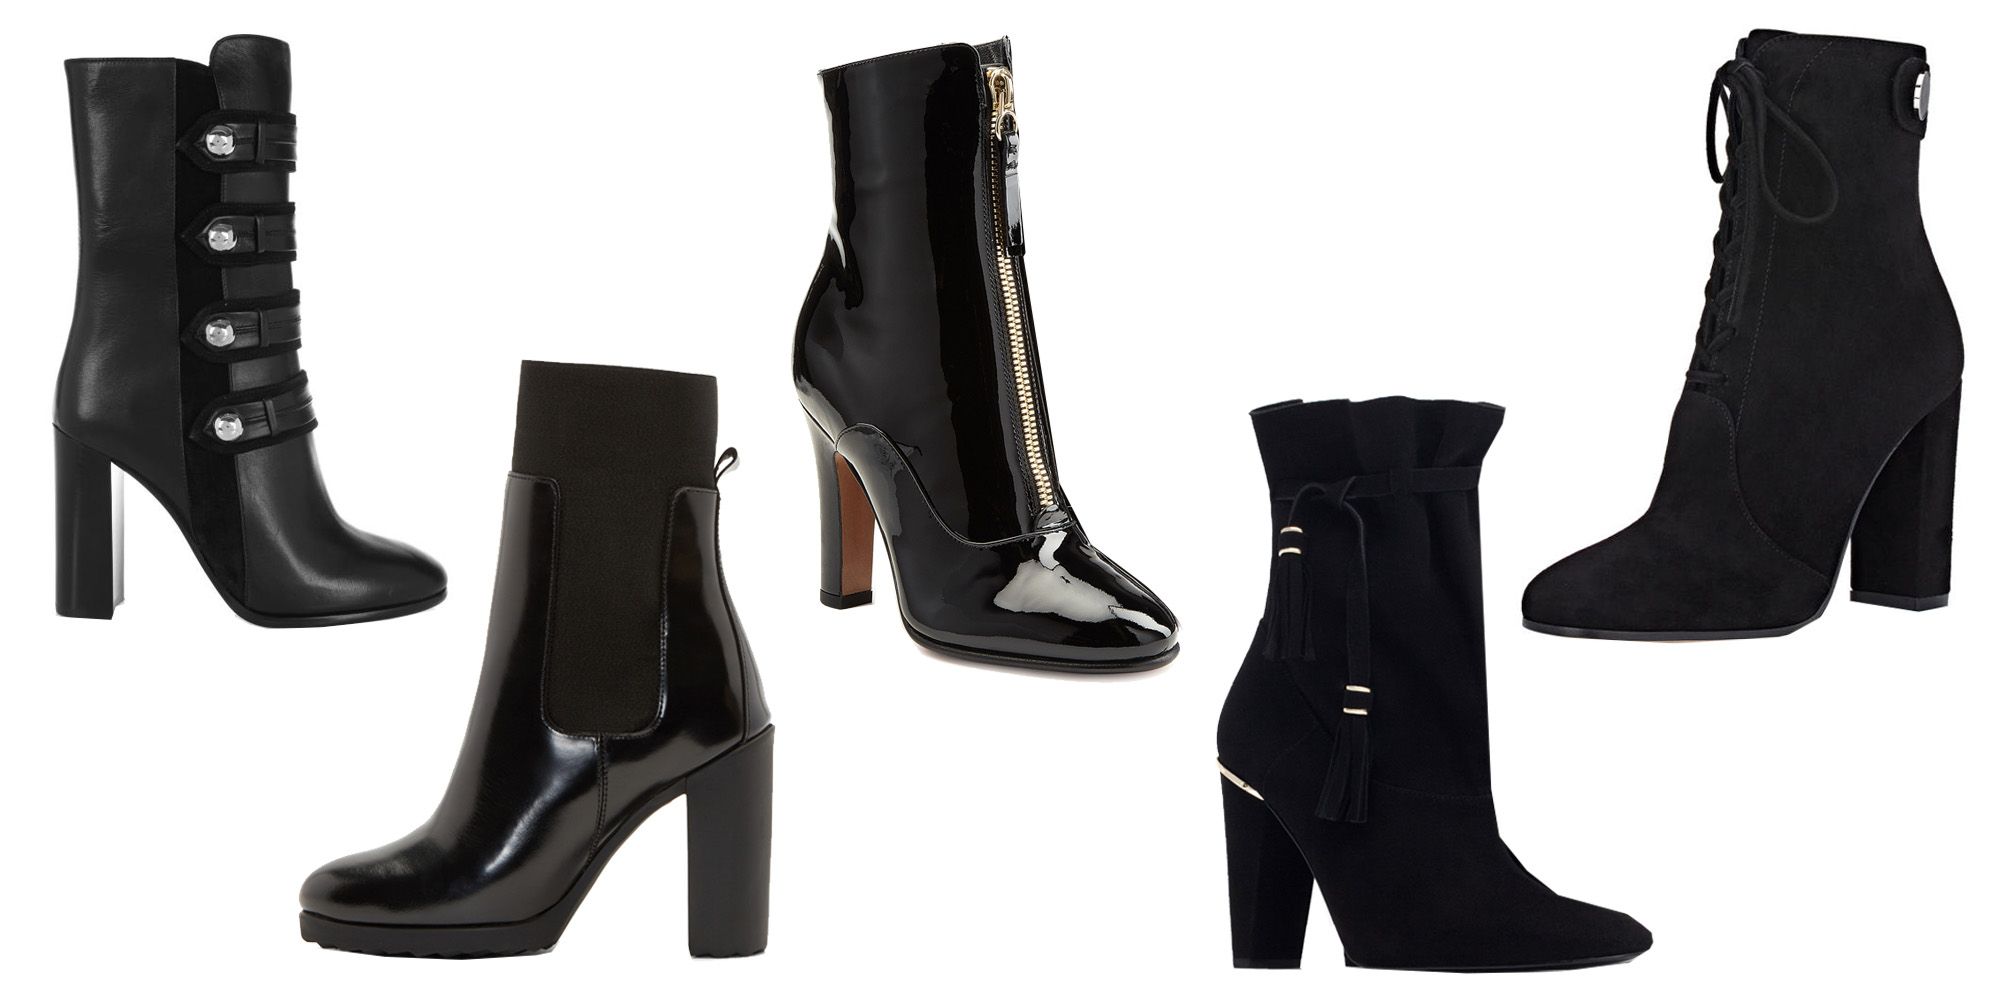 Buy > next ankle boots black > in stock